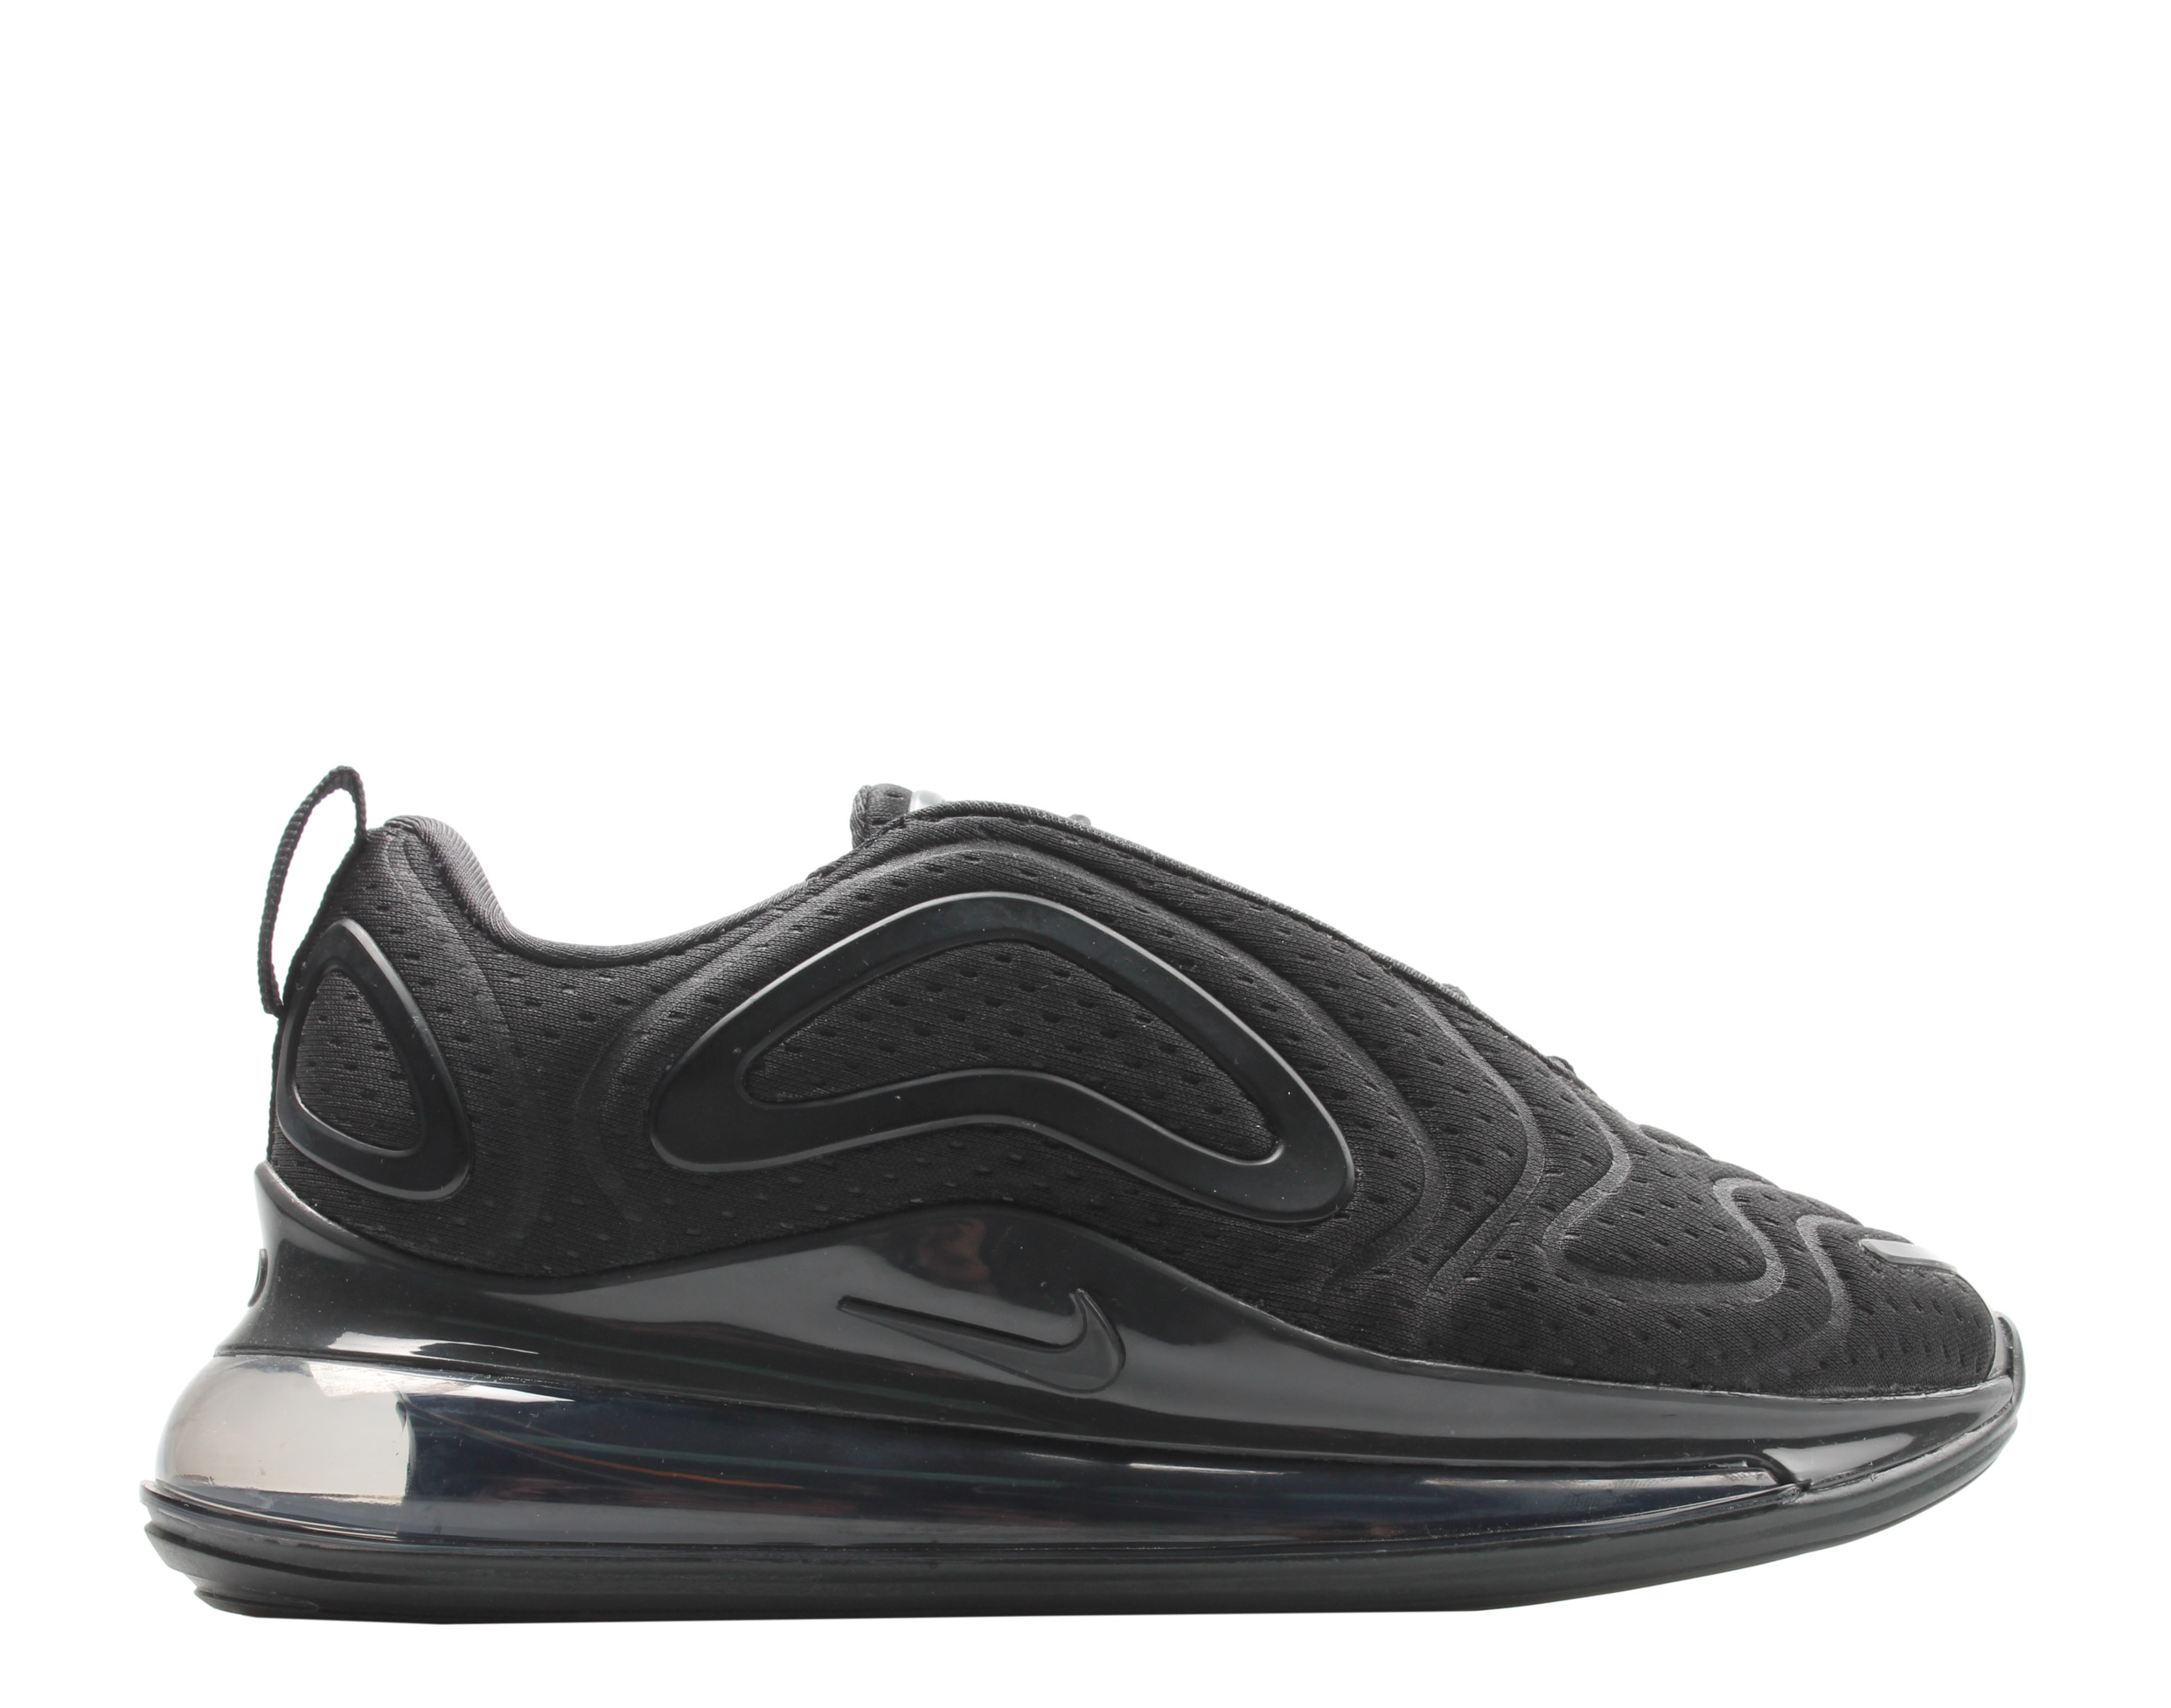 Nike Air Max 720 Women's Running Shoes Size 8 - image 2 of 6